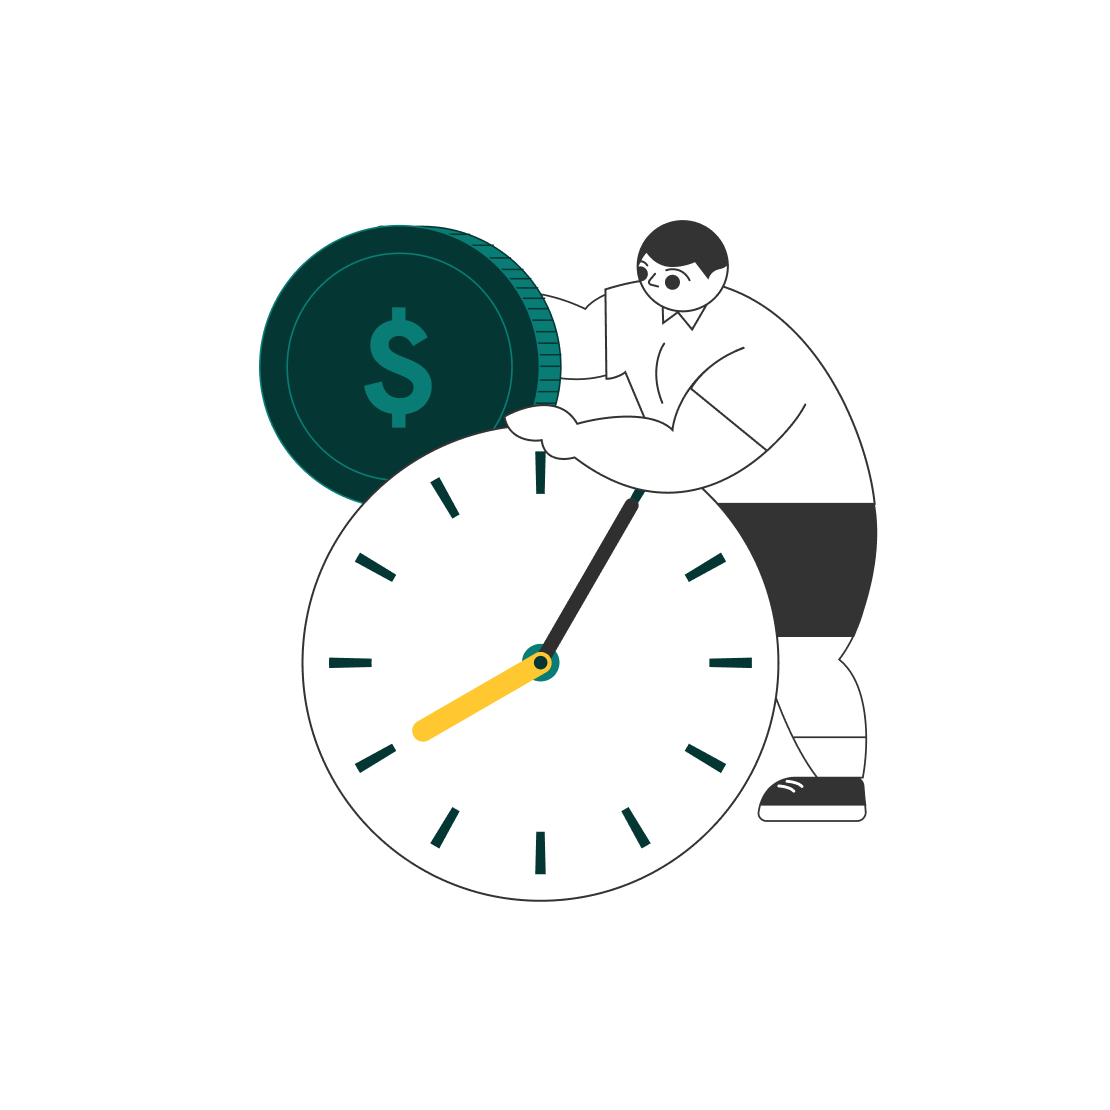 An illustration of a man dealing with a clock and a coin